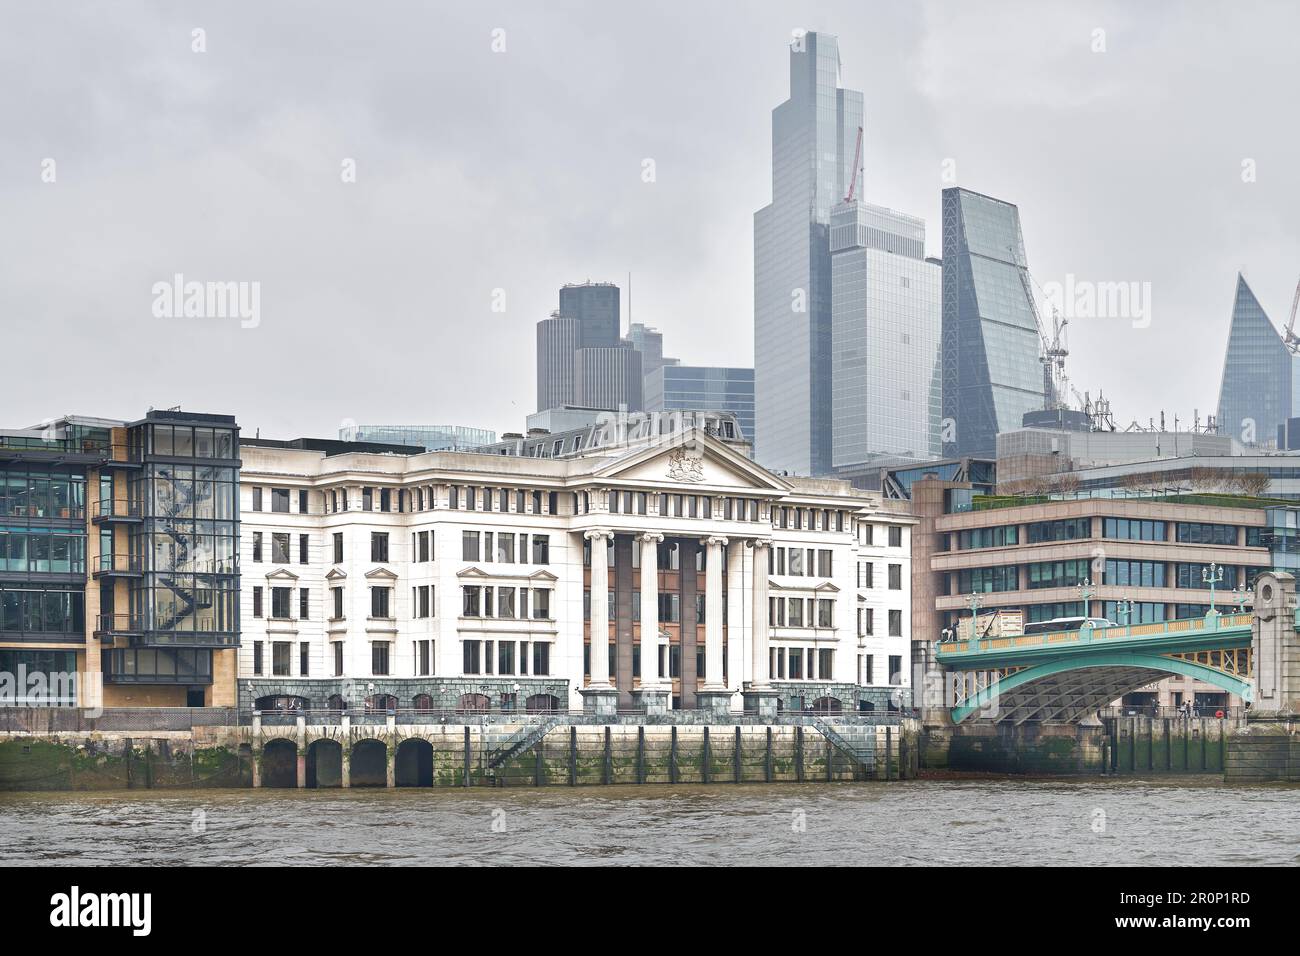 Vintner's Place, on a bank of the river Thames by Southwark bridge, London, England, with the City of London financial district skyscrapers behind. Stock Photo